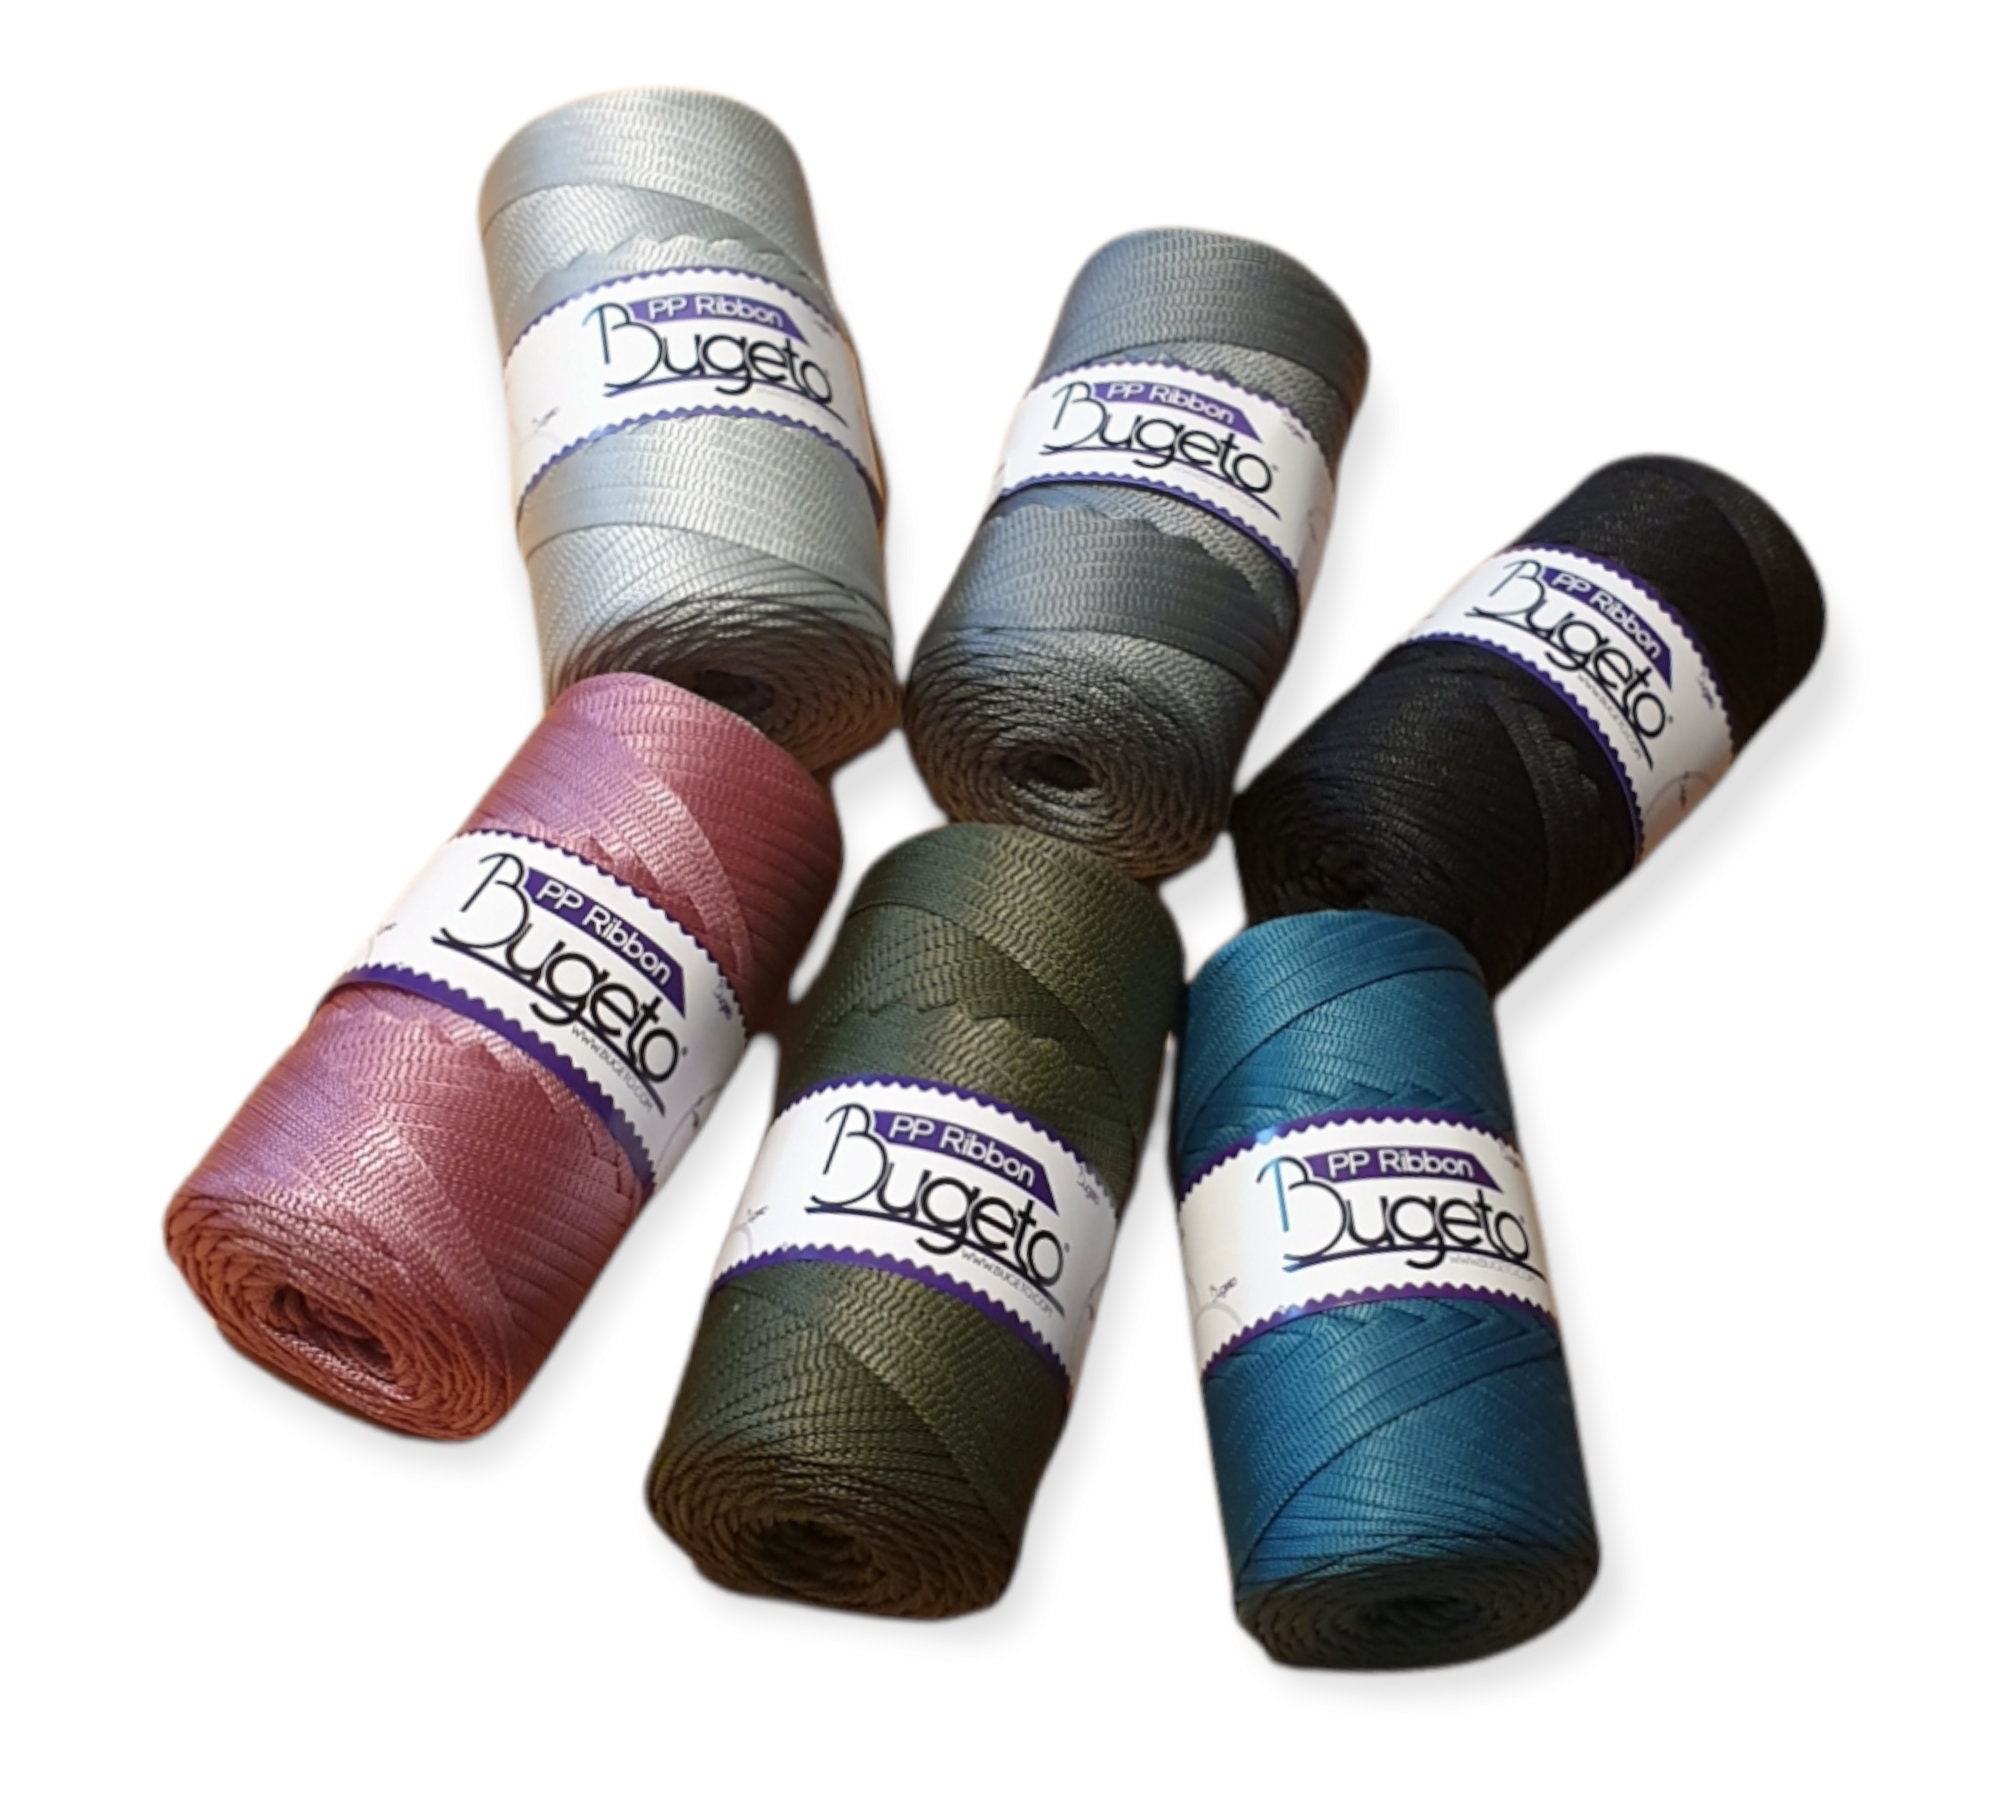 Alternating Color Jute Cord - 5/16 Wide Online Ribbon - May Arts